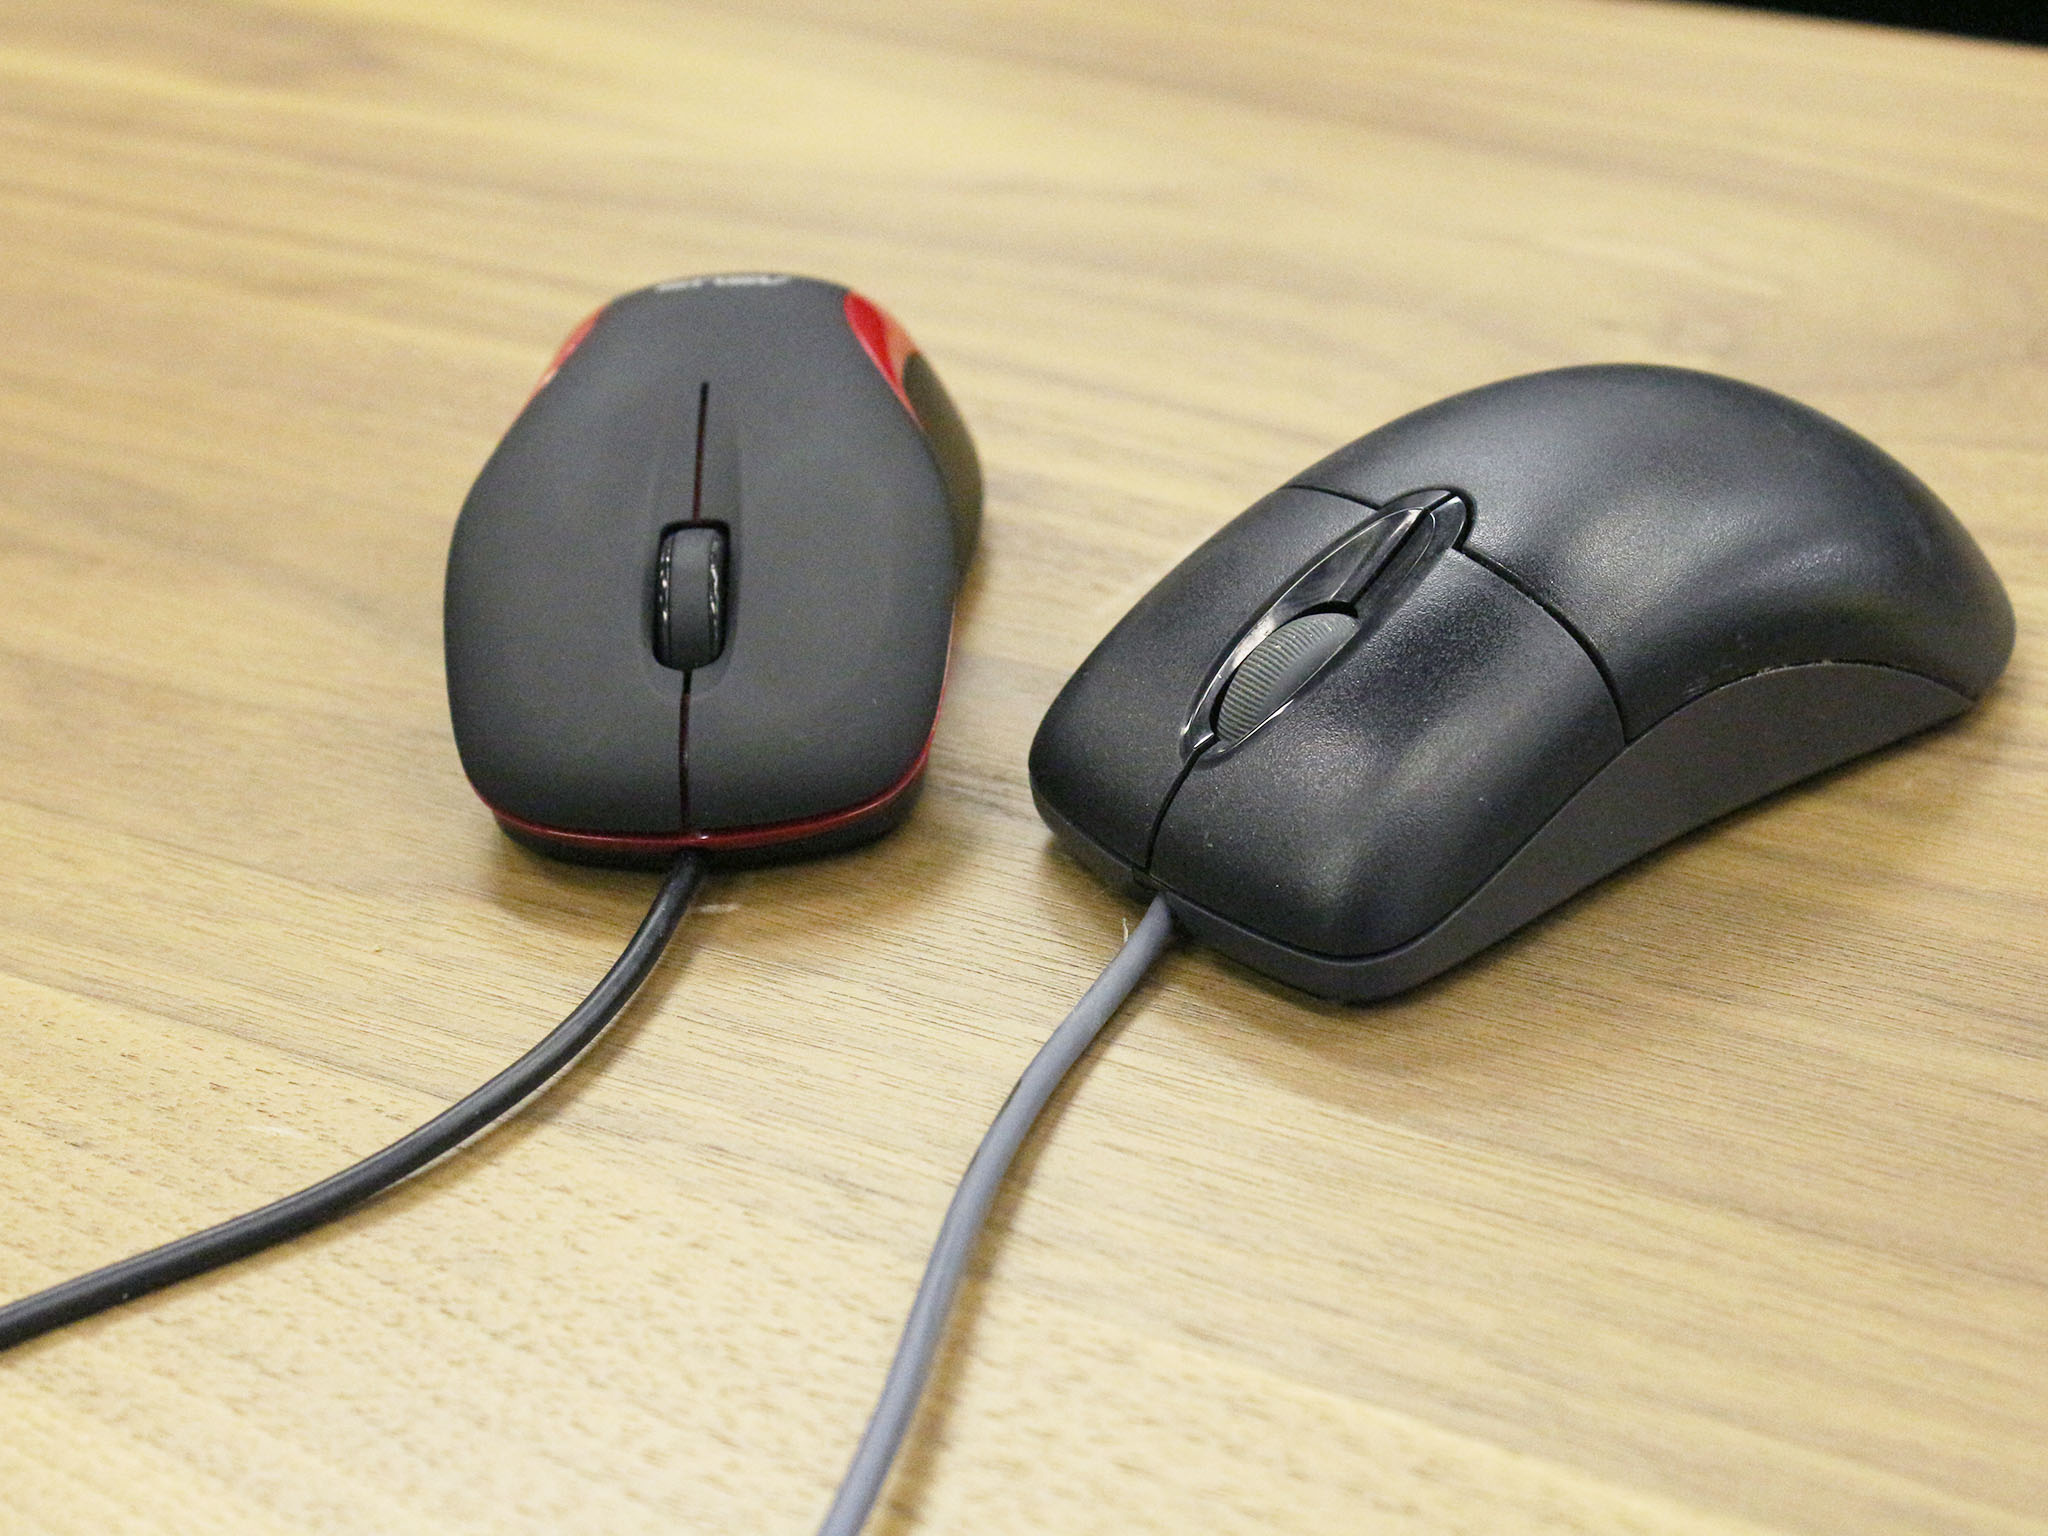 Wired mice